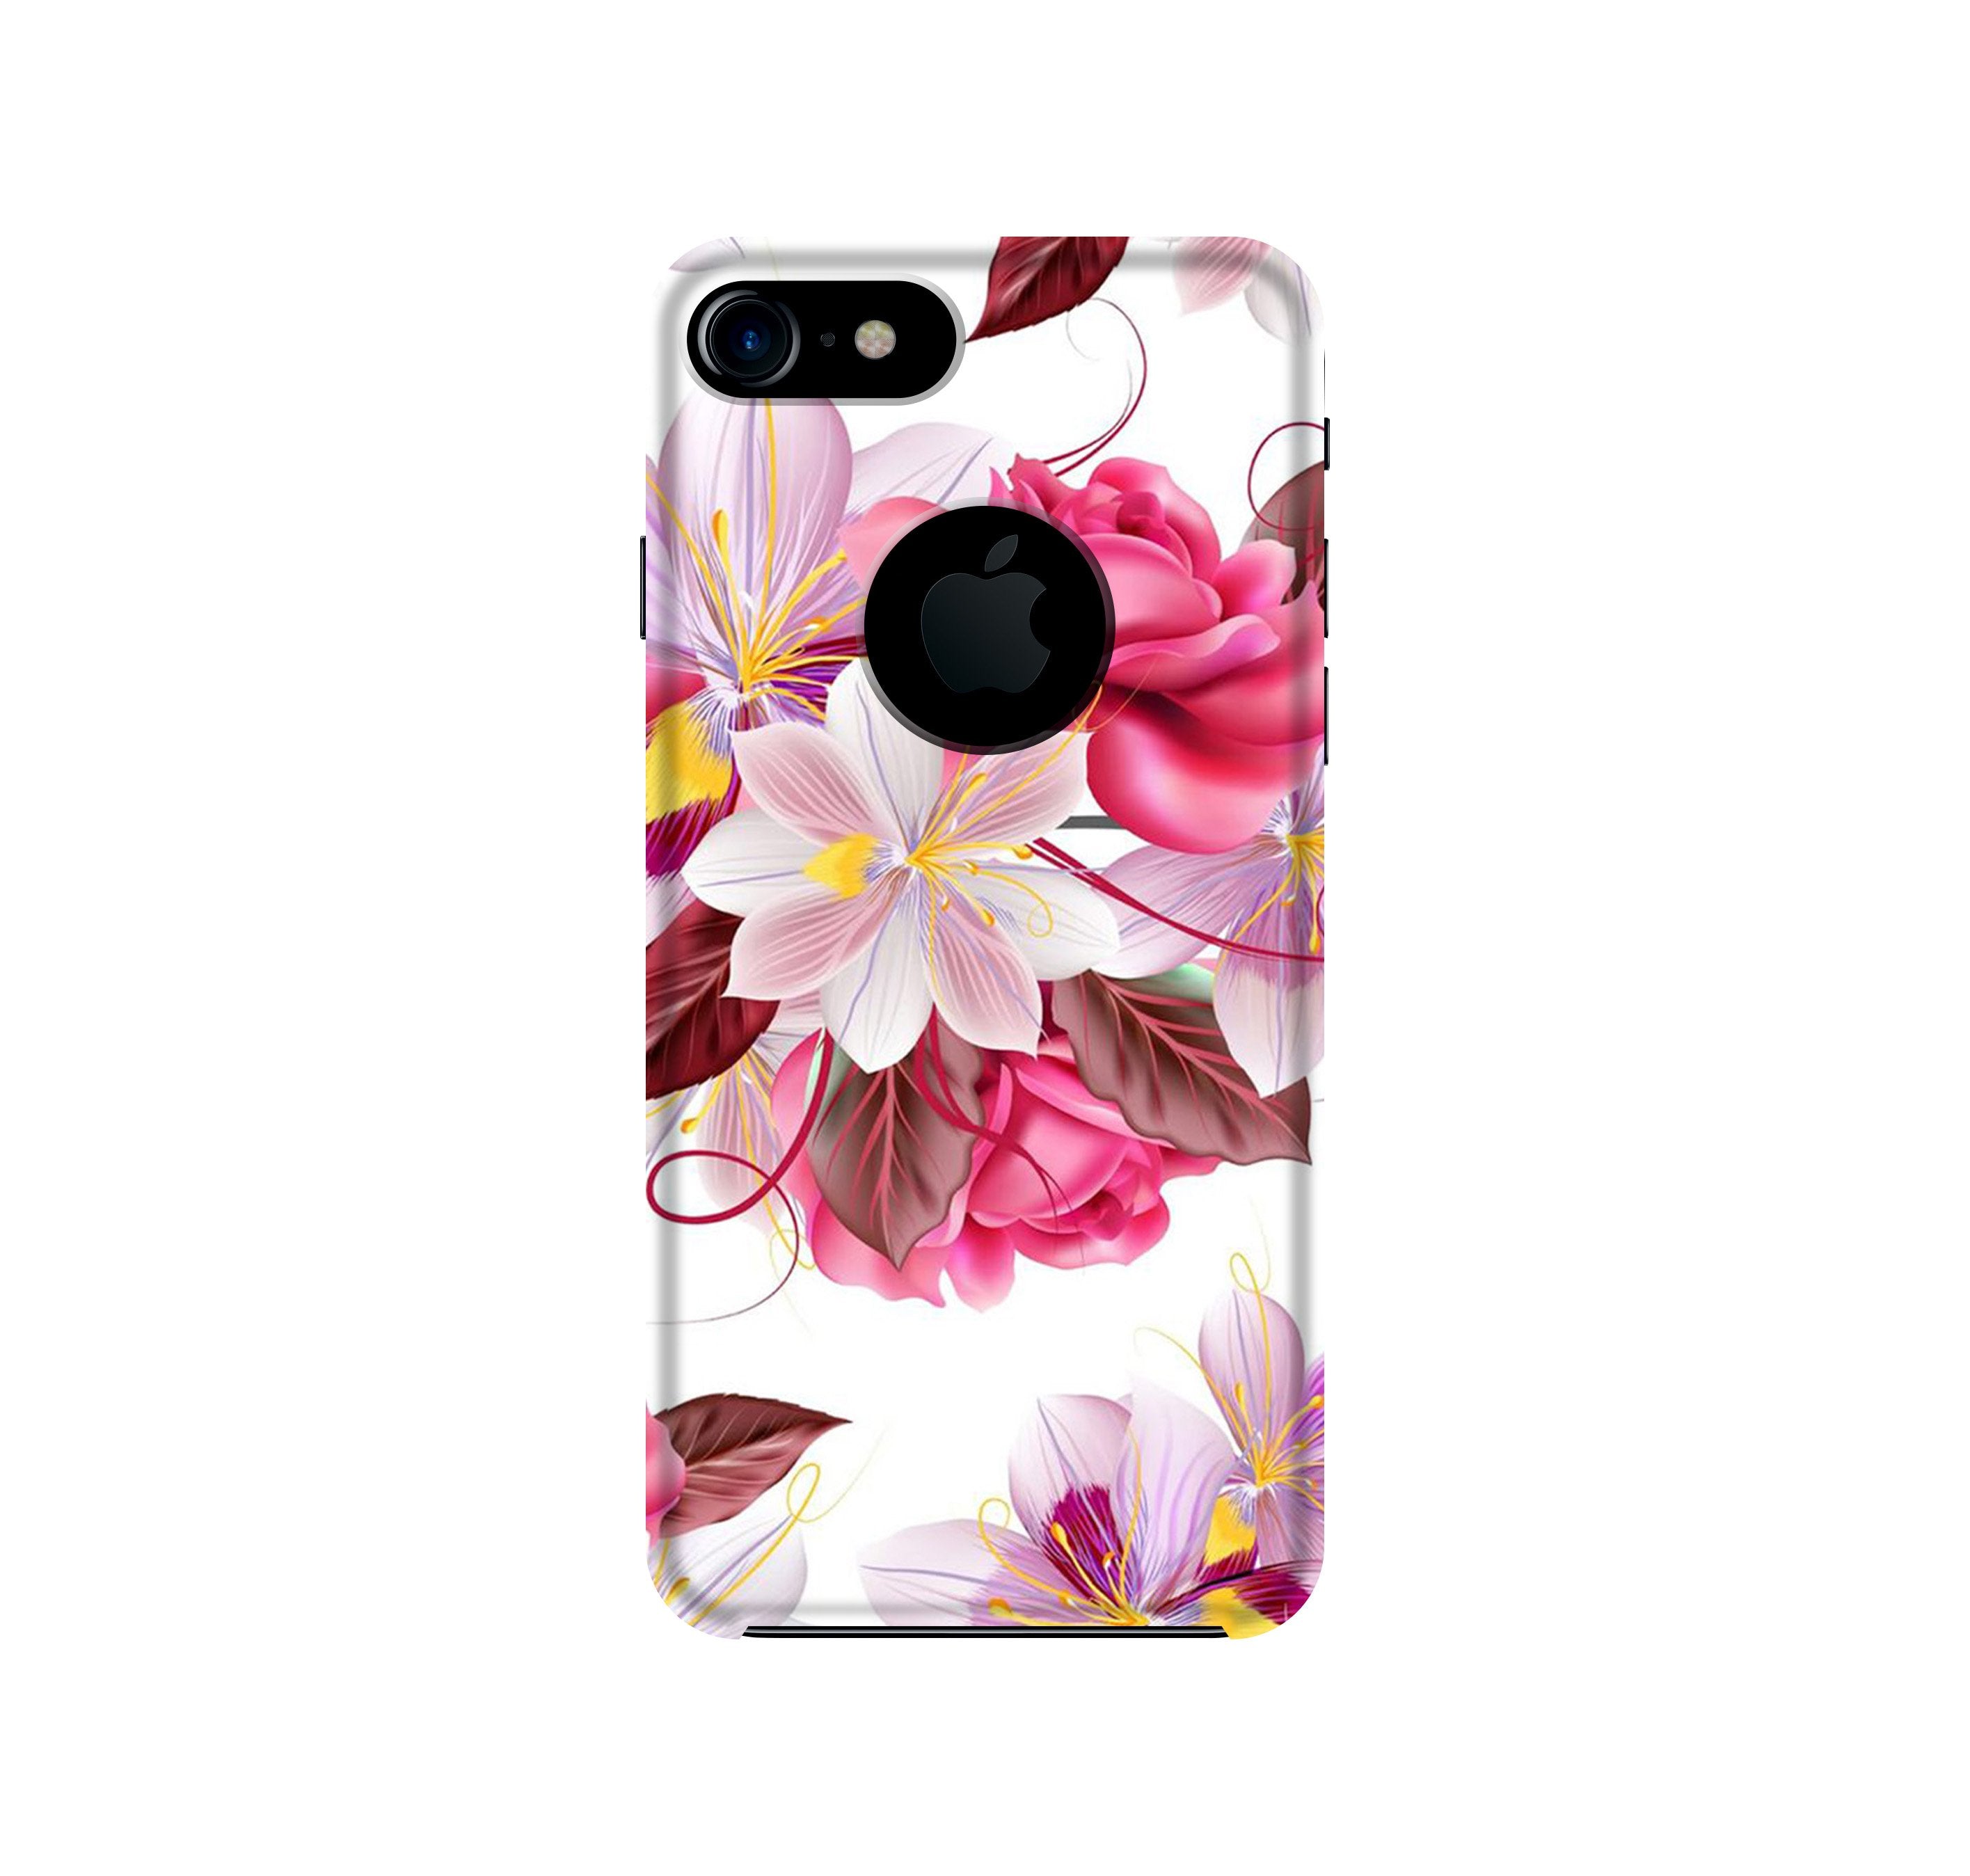 Beautiful flowers Case for iPhone 7 logo cut